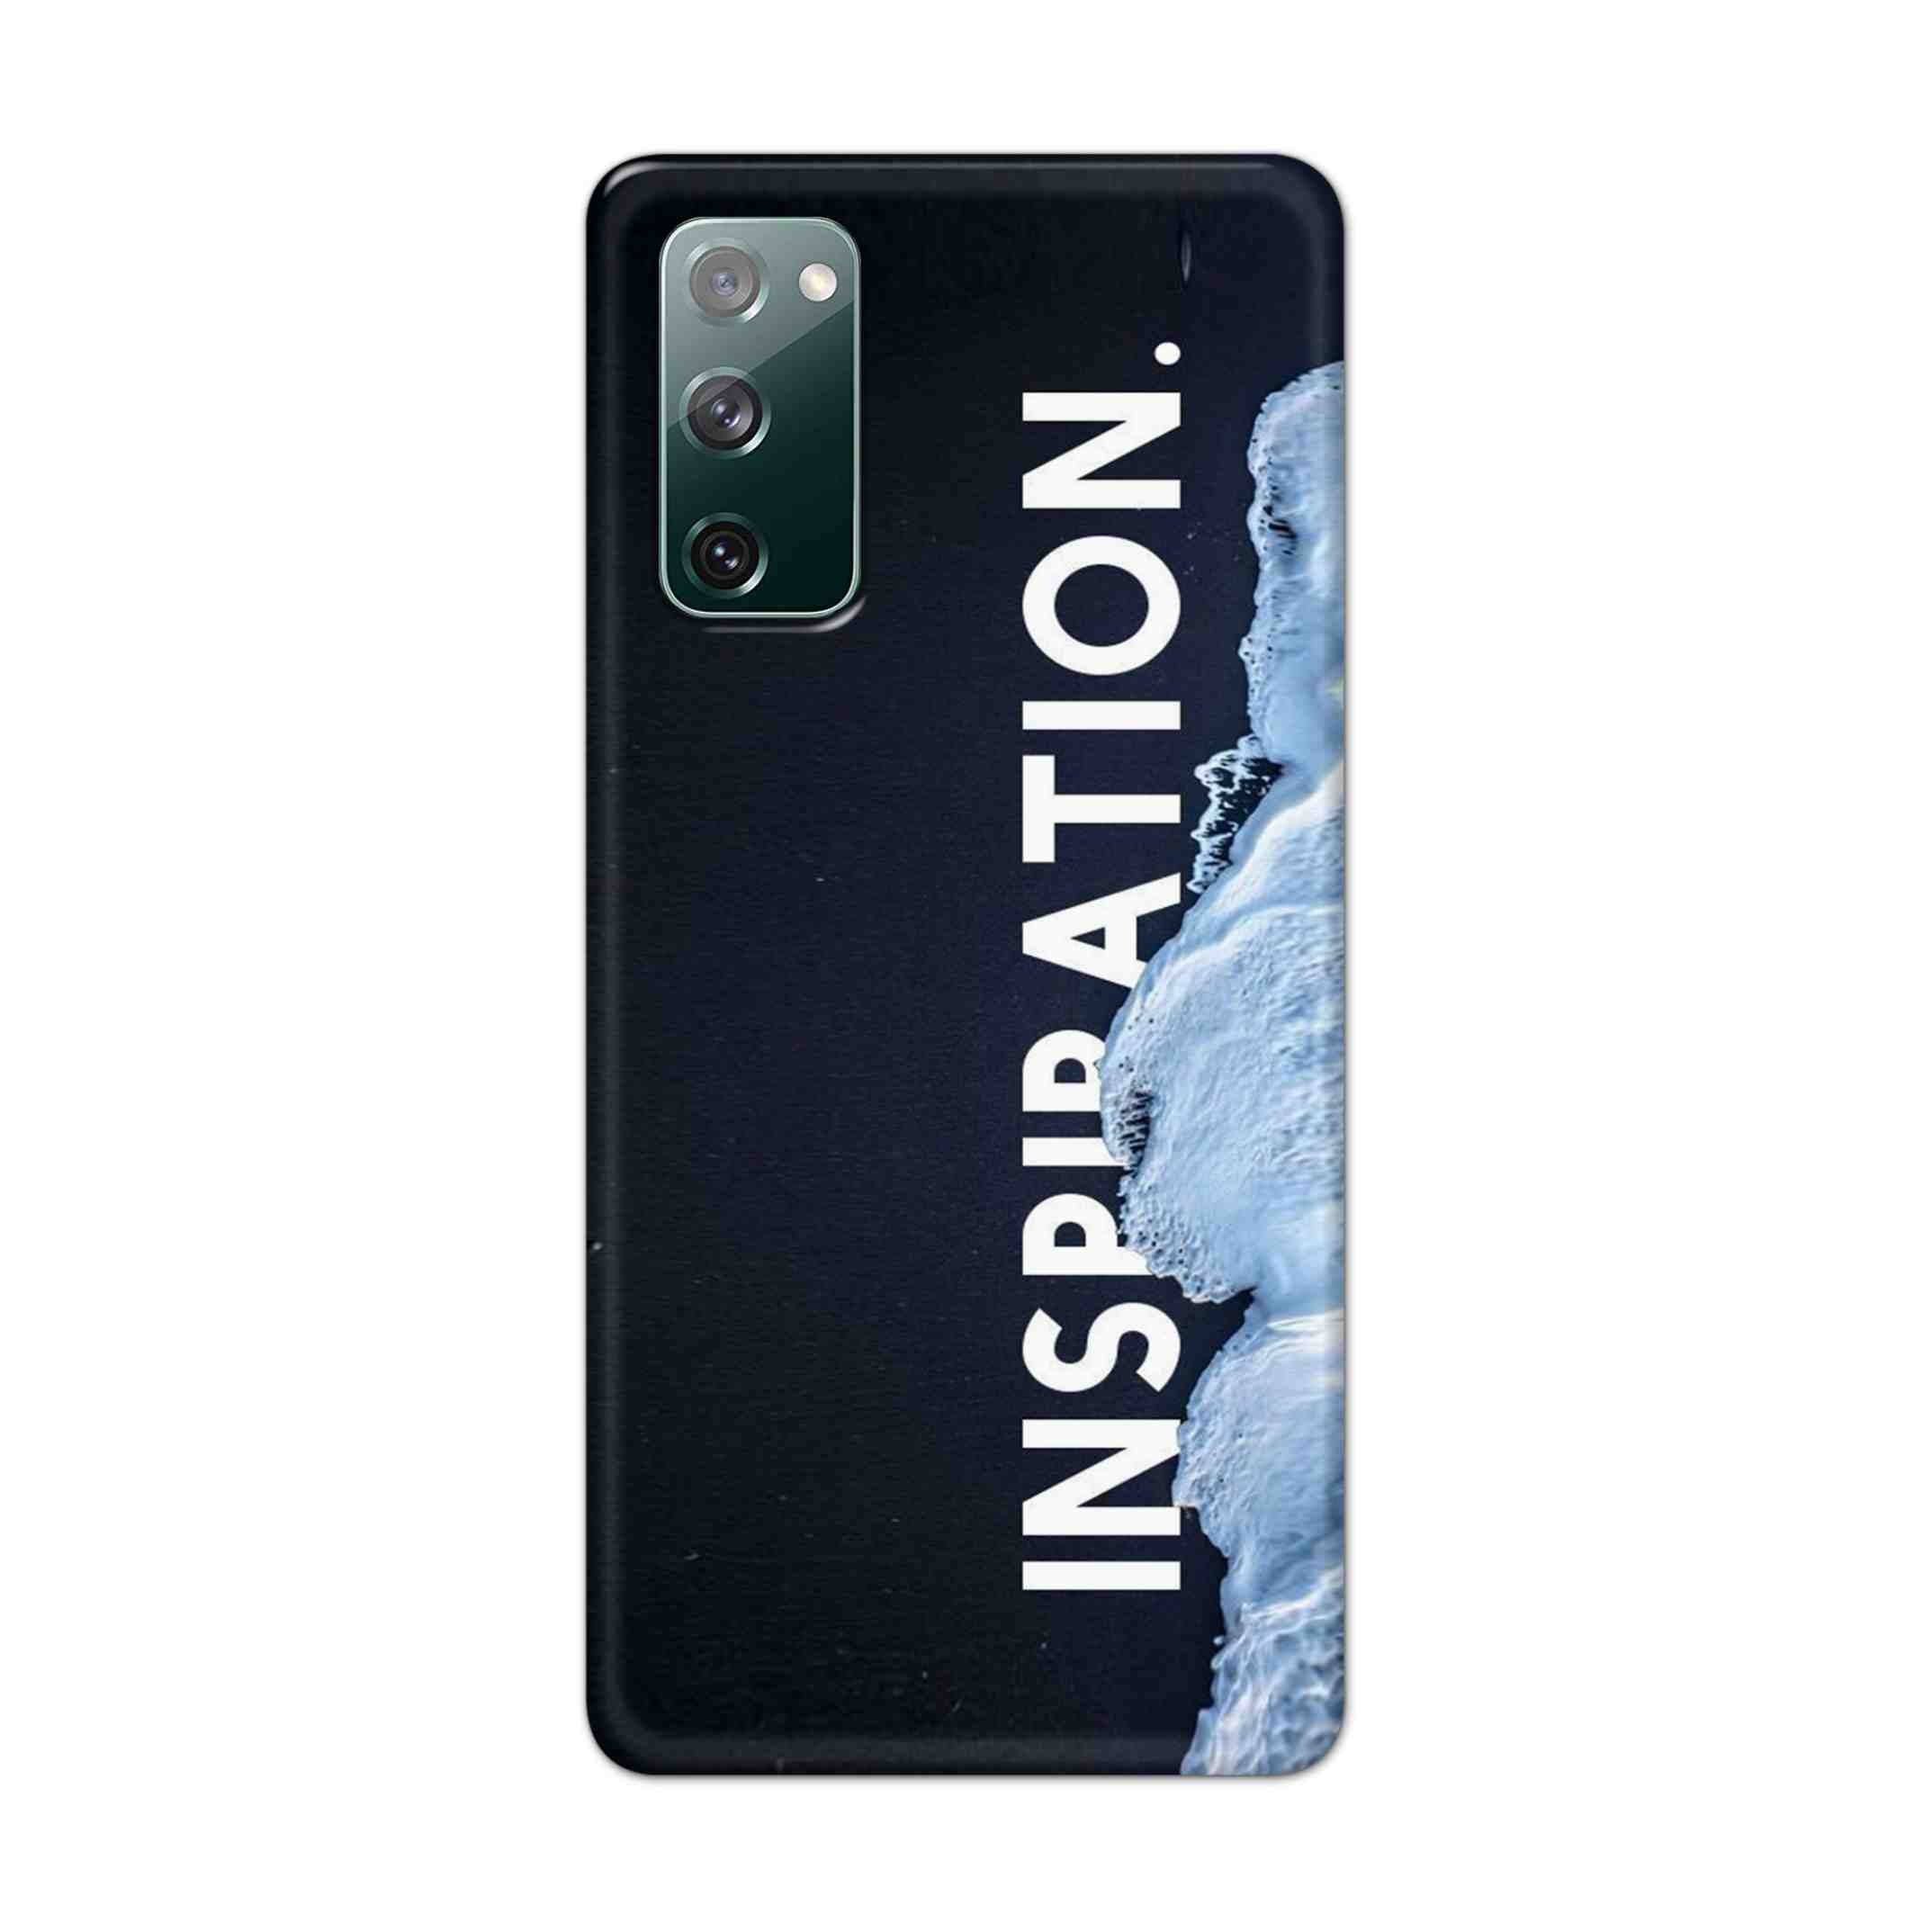 Buy Inspiration Hard Back Mobile Phone Case Cover For Samsung Galaxy S20 FE Online